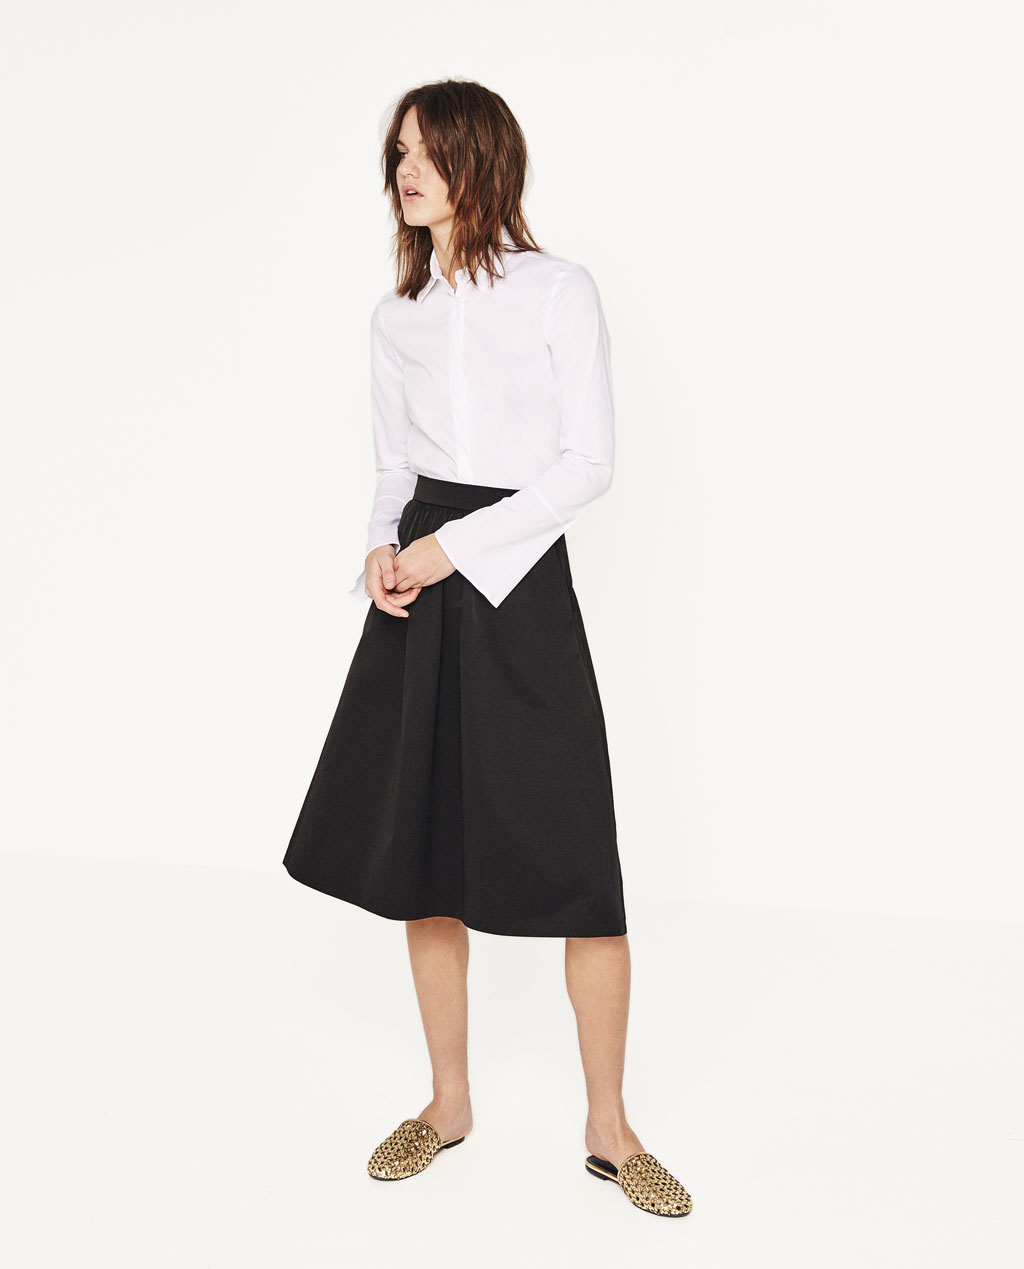 Zara Canada's Hot & Trendy Promotion: Save Up to 50% Off Men, Women & Kid's  Sale Items - Canadian Freebies, Coupons, Deals, Bargains, Flyers, Contests Canada  Canadian Freebies, Coupons, Deals, Bargains, Flyers